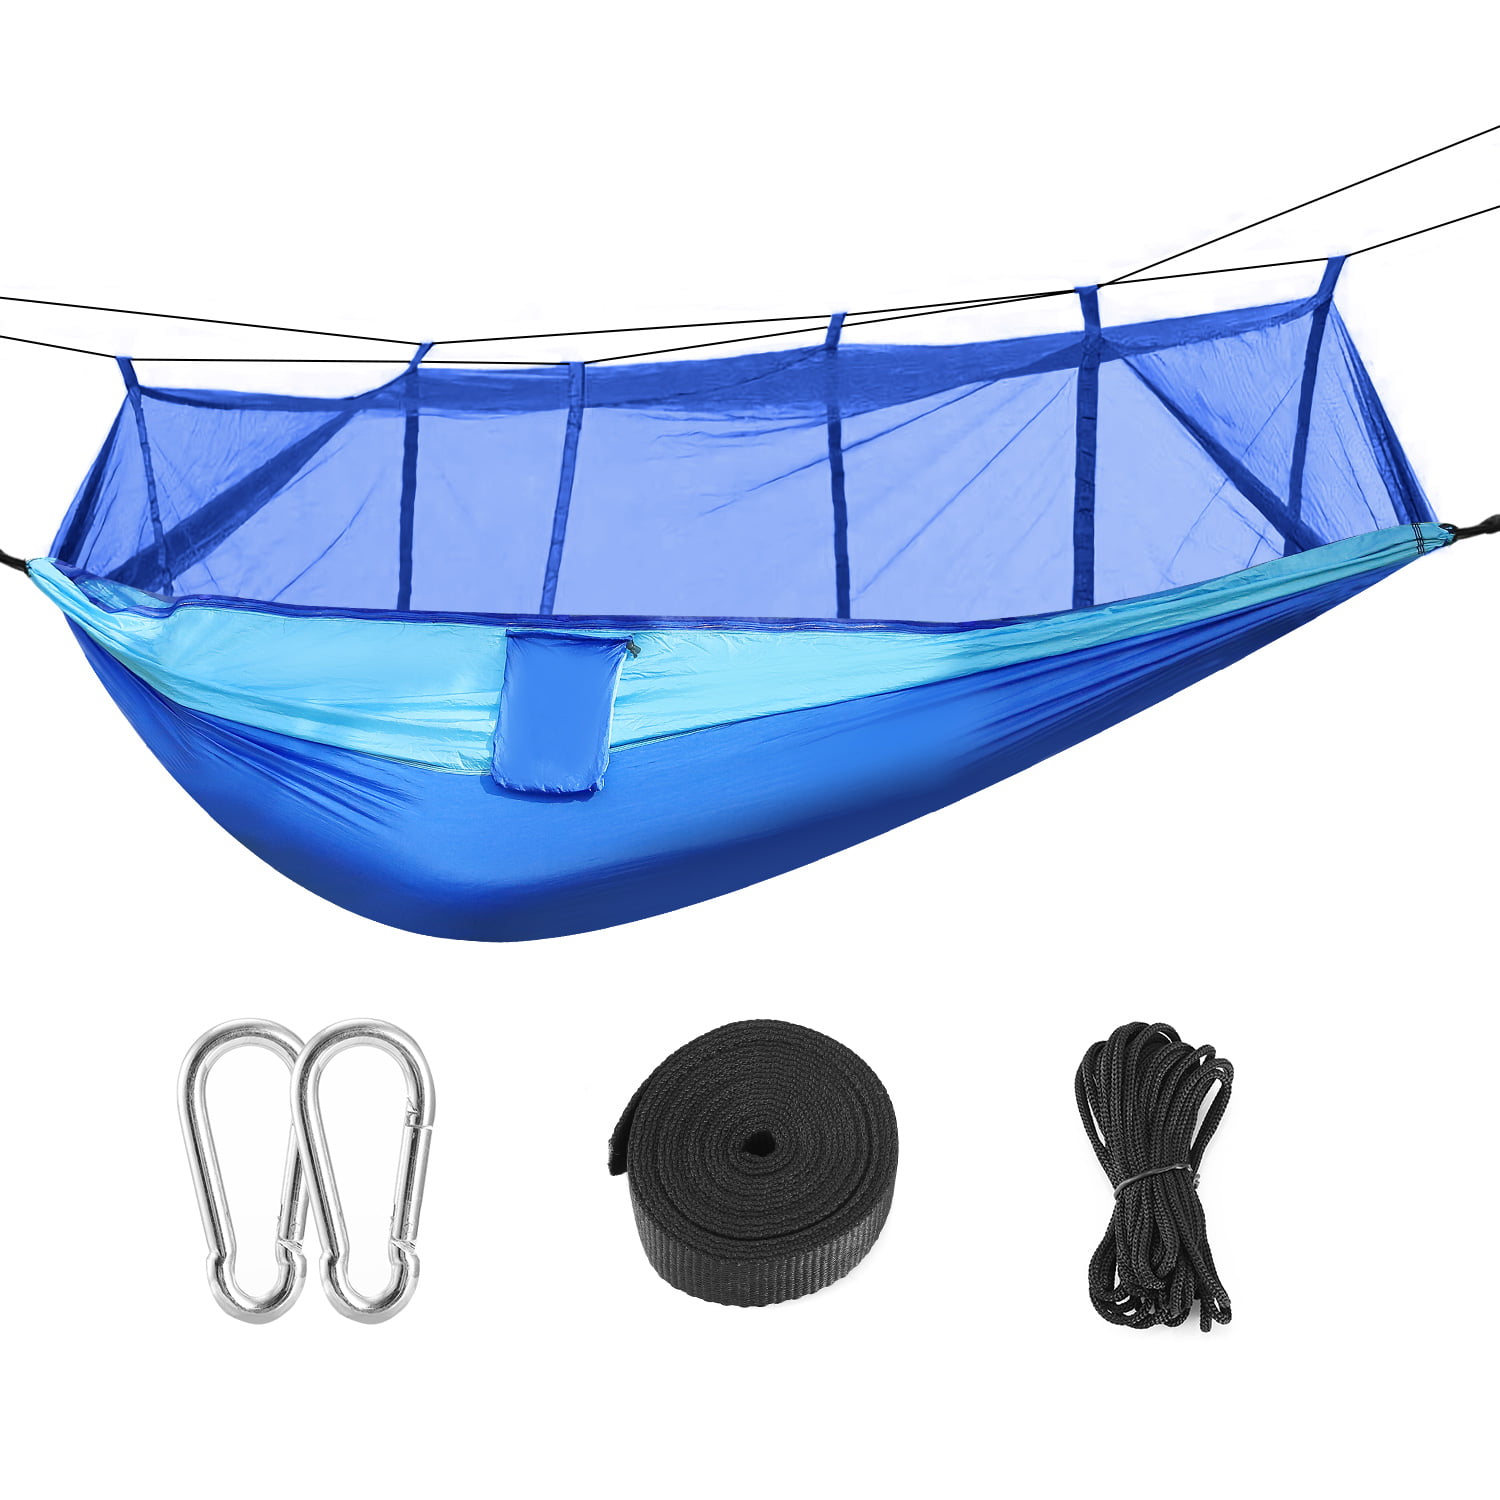 Premium Quality Camping Hammock Lightweight Parachute Fabric Travel Bed Mosquito Net Outdoor Hammock for Indoor Camping Hiking Backpacking Backyard 